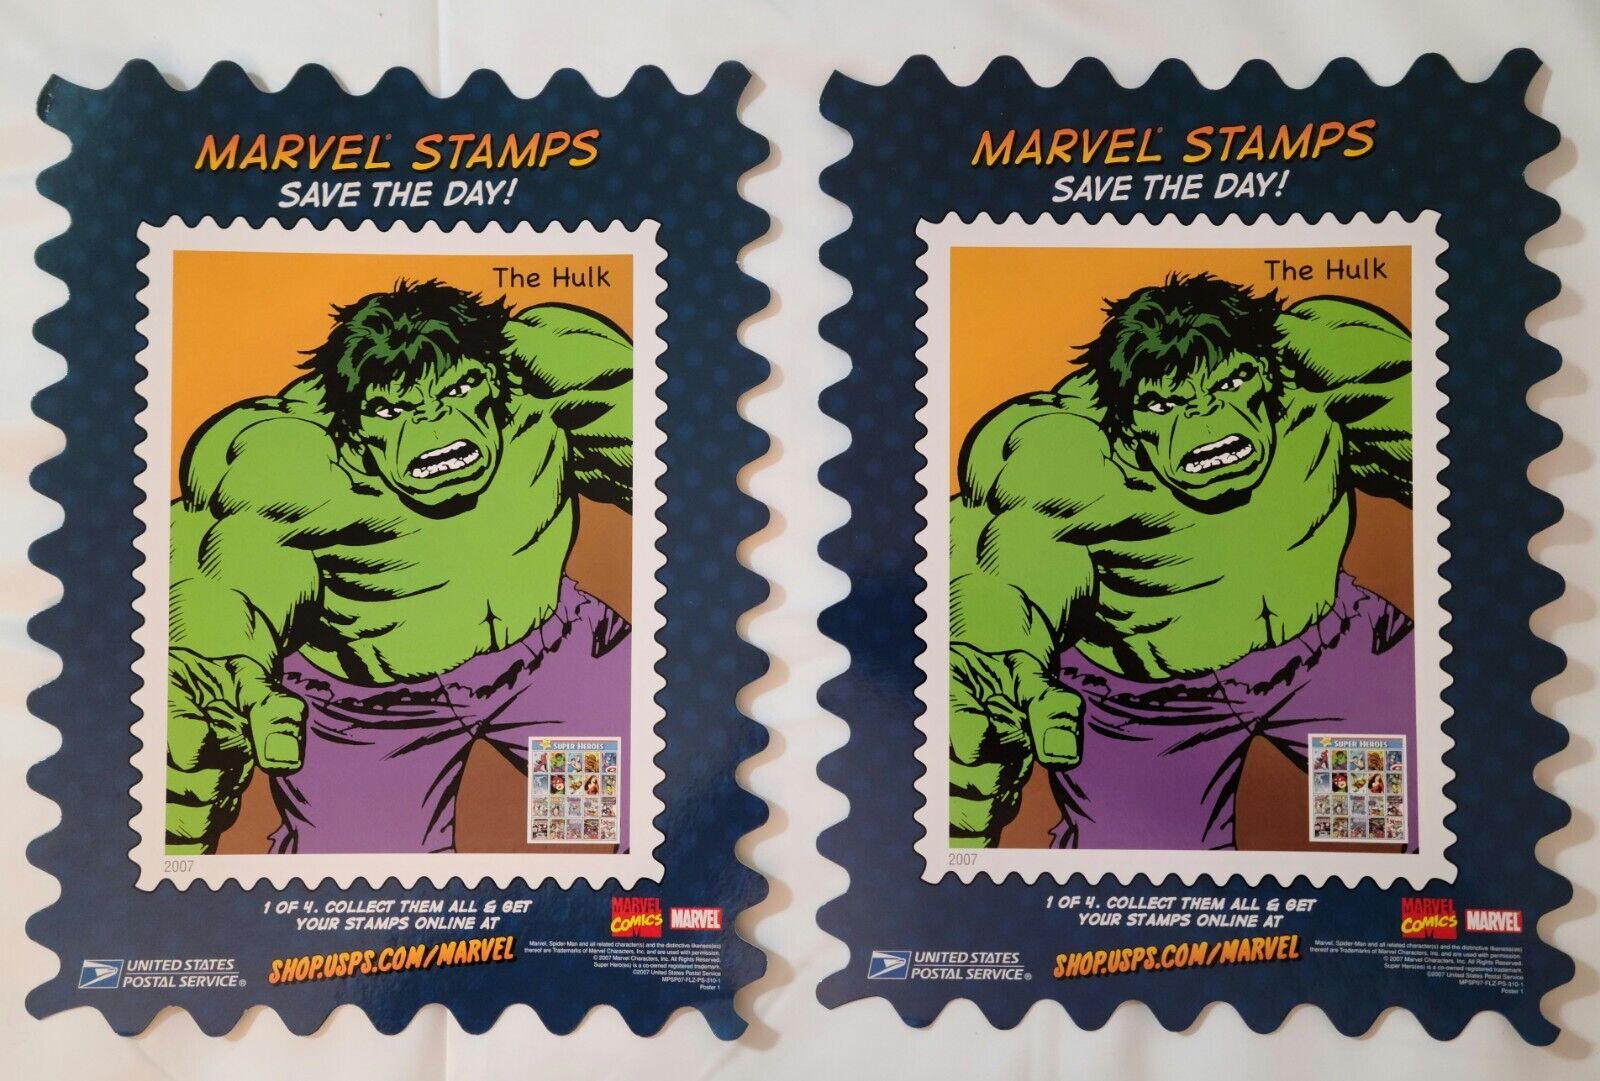 2007 USPS -Hulk, Marvel Stamps Save The Day  (1 of 4) 2 Copies